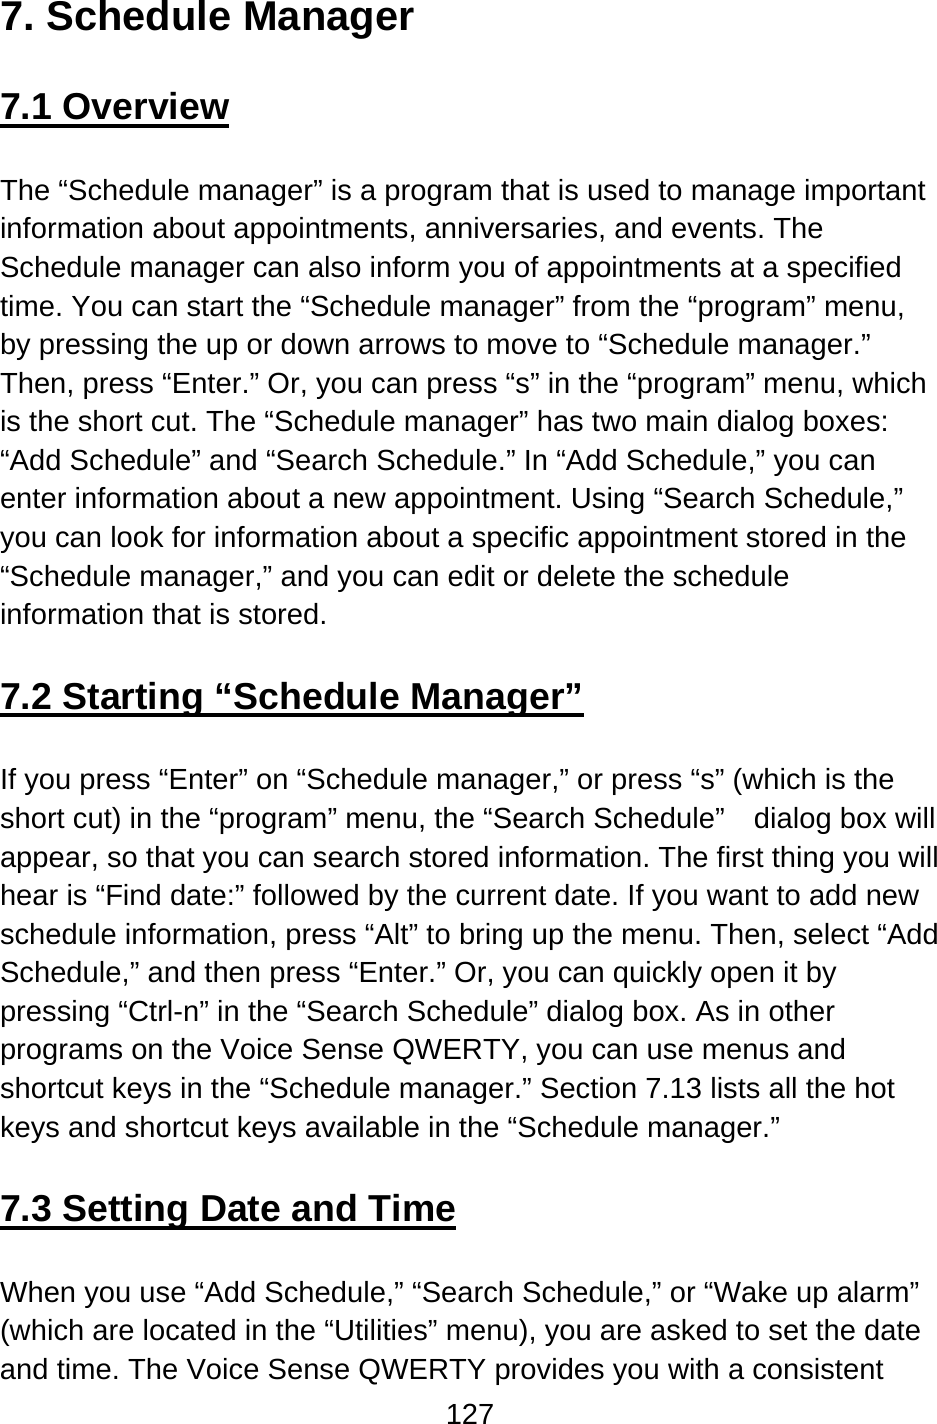 127  7. Schedule Manager  7.1 Overview  The “Schedule manager” is a program that is used to manage important information about appointments, anniversaries, and events. The Schedule manager can also inform you of appointments at a specified time. You can start the “Schedule manager” from the “program” menu, by pressing the up or down arrows to move to “Schedule manager.”   Then, press “Enter.” Or, you can press “s” in the “program” menu, which is the short cut. The “Schedule manager” has two main dialog boxes:   “Add Schedule” and “Search Schedule.” In “Add Schedule,” you can enter information about a new appointment. Using “Search Schedule,” you can look for information about a specific appointment stored in the “Schedule manager,” and you can edit or delete the schedule information that is stored.  7.2 Starting “Schedule Manager”  If you press “Enter” on “Schedule manager,” or press “s” (which is the short cut) in the “program” menu, the “Search Schedule”    dialog box will appear, so that you can search stored information. The first thing you will hear is “Find date:” followed by the current date. If you want to add new schedule information, press “Alt” to bring up the menu. Then, select “Add Schedule,” and then press “Enter.” Or, you can quickly open it by pressing “Ctrl-n” in the “Search Schedule” dialog box. As in other programs on the Voice Sense QWERTY, you can use menus and shortcut keys in the “Schedule manager.” Section 7.13 lists all the hot keys and shortcut keys available in the “Schedule manager.”  7.3 Setting Date and Time  When you use “Add Schedule,” “Search Schedule,” or “Wake up alarm” (which are located in the “Utilities” menu), you are asked to set the date and time. The Voice Sense QWERTY provides you with a consistent 